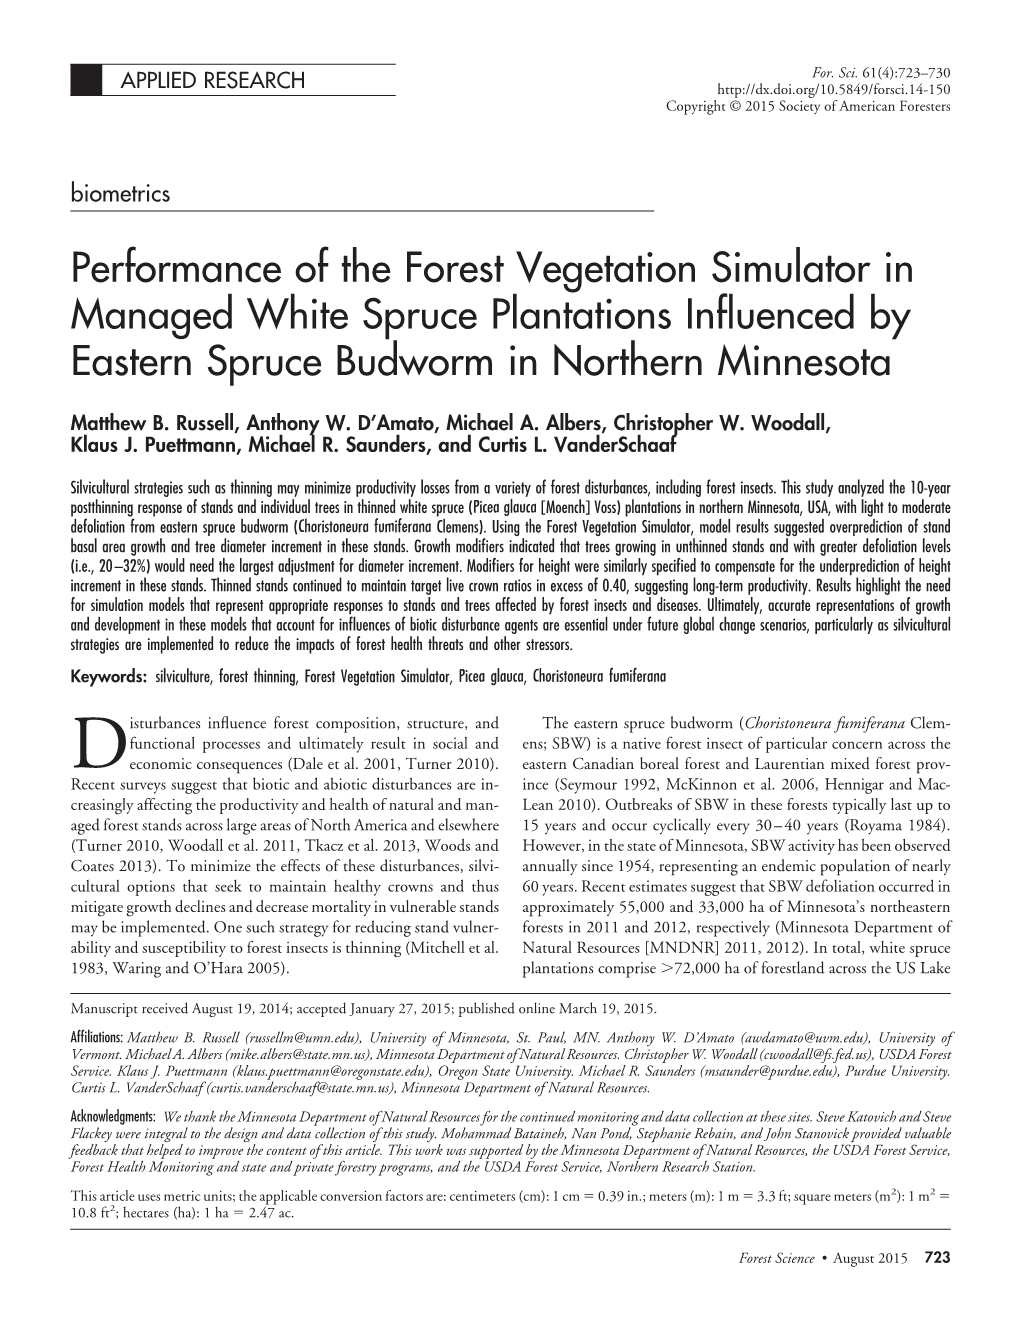 Performance of the Forest Vegetation Simulator in Managed White Spruce Plantations Inﬂuenced by Eastern Spruce Budworm in Northern Minnesota